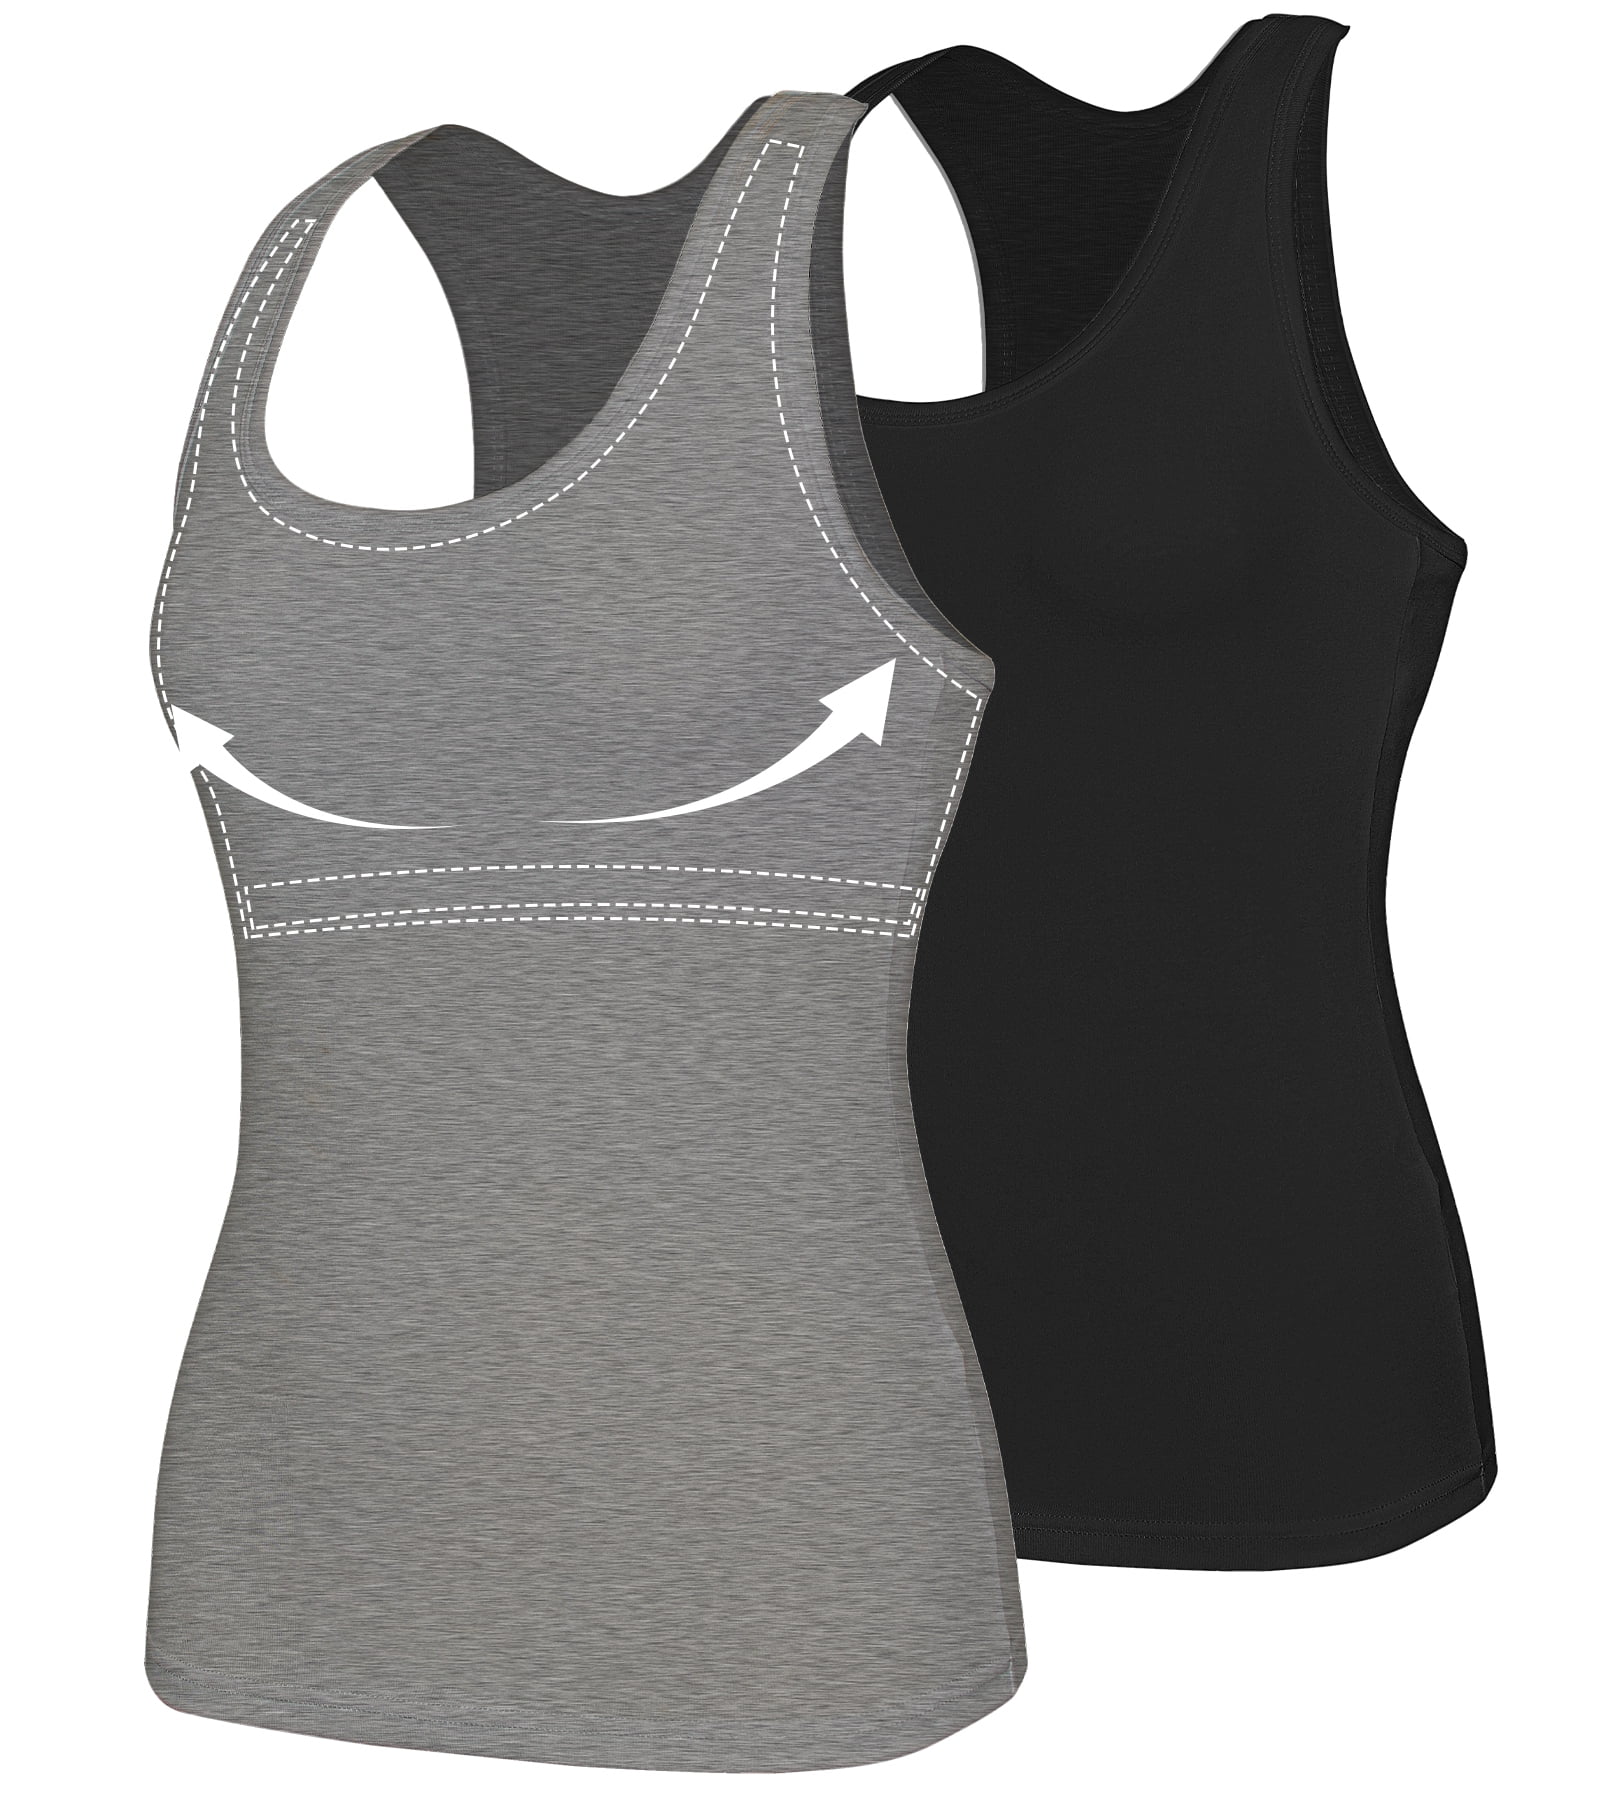  BMJL Womens Workout Tank Tops Sleeveless Shelf Bra Running Vest  Strappy Back Athletic Shirts (Small, Gray) : Clothing, Shoes & Jewelry